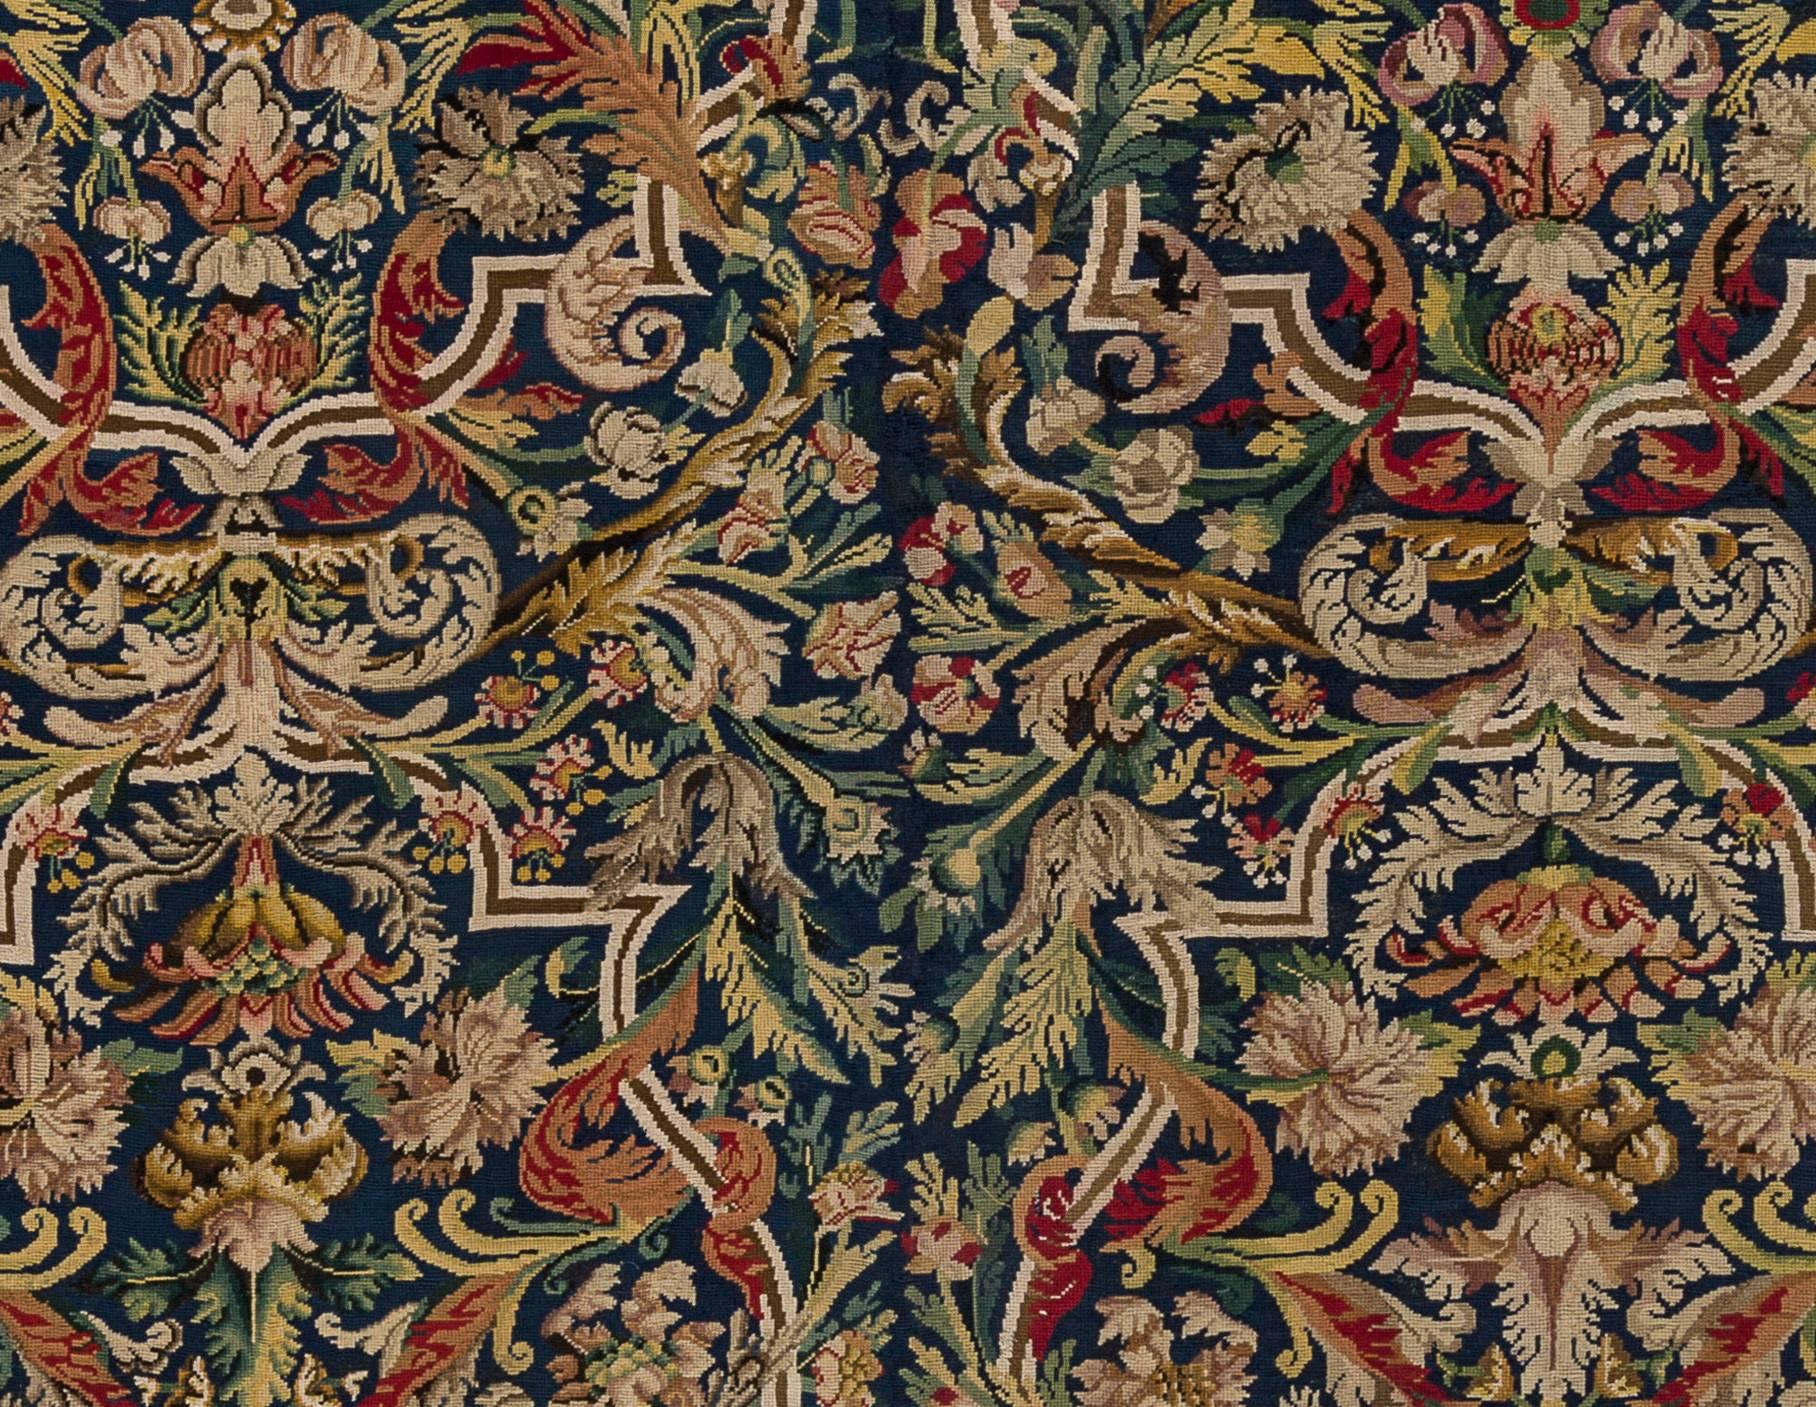 Elegant needlepoint carpet
France, Louis XIV period (Late 17th - early 18th century)
Silk and wool.

On a black background, typical Louis XIV design made of interlacing and garlands of flowers. Thin border with a garland of flowers.